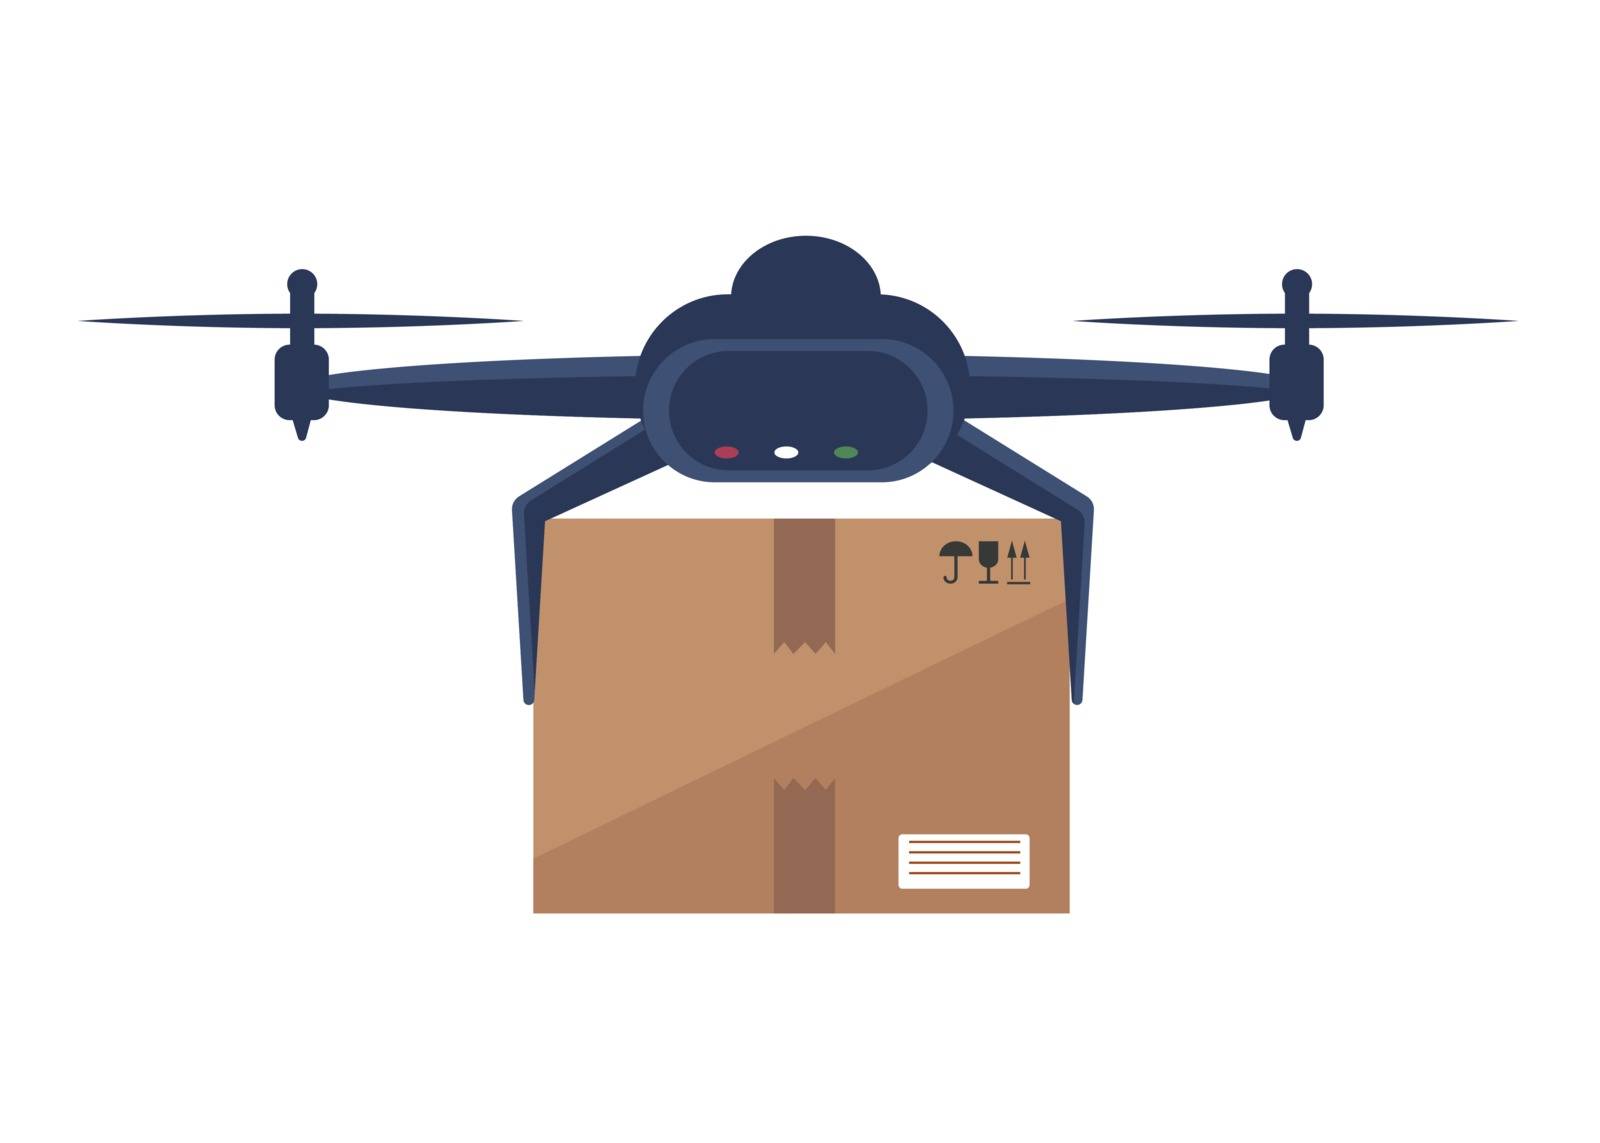 Drone delivers boxes . Non-contact delivery concept. Remote air drone with boxes. Contactless express delivery service. Self-isolation lifestyle. Contactless delivery during quarantine.